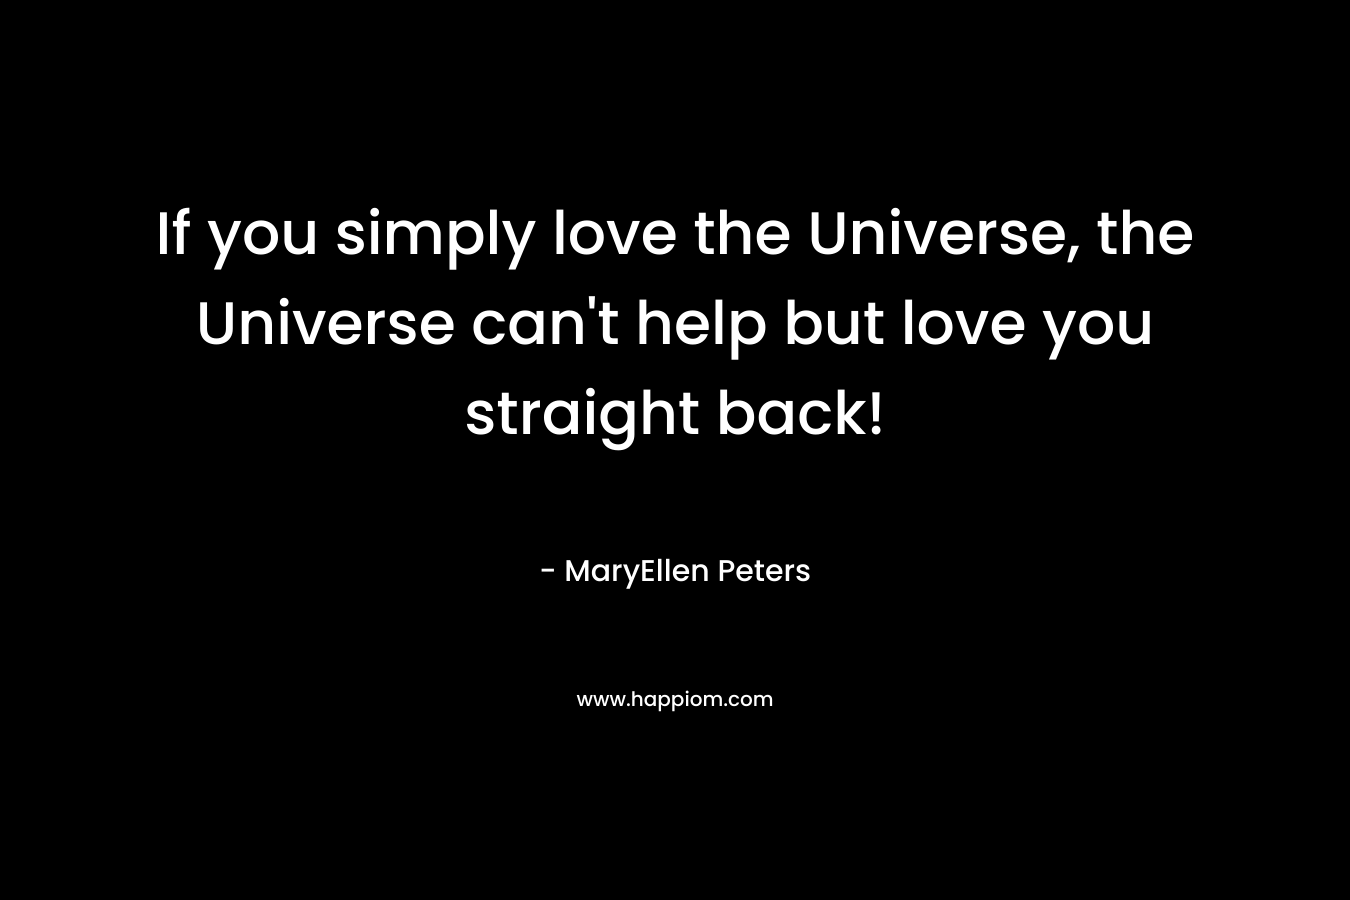 If you simply love the Universe, the Universe can't help but love you straight back!